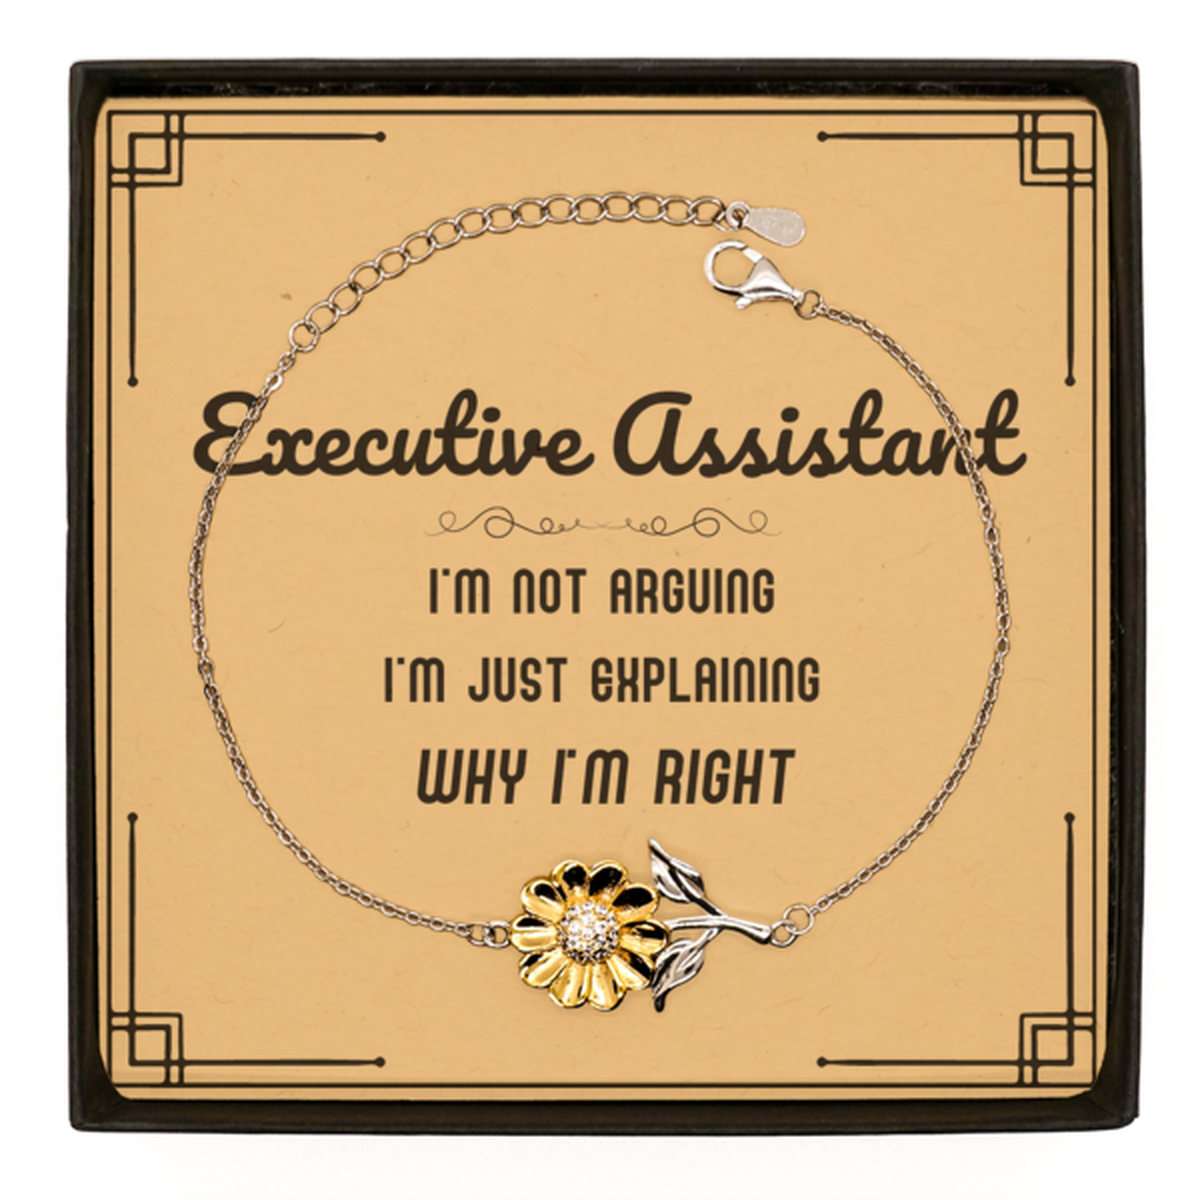 Executive Assistant I'm not Arguing. I'm Just Explaining Why I'm RIGHT Sunflower Bracelet, Funny Saying Quote Executive Assistant Gifts For Executive Assistant Message Card Graduation Birthday Christmas Gifts for Men Women Coworker